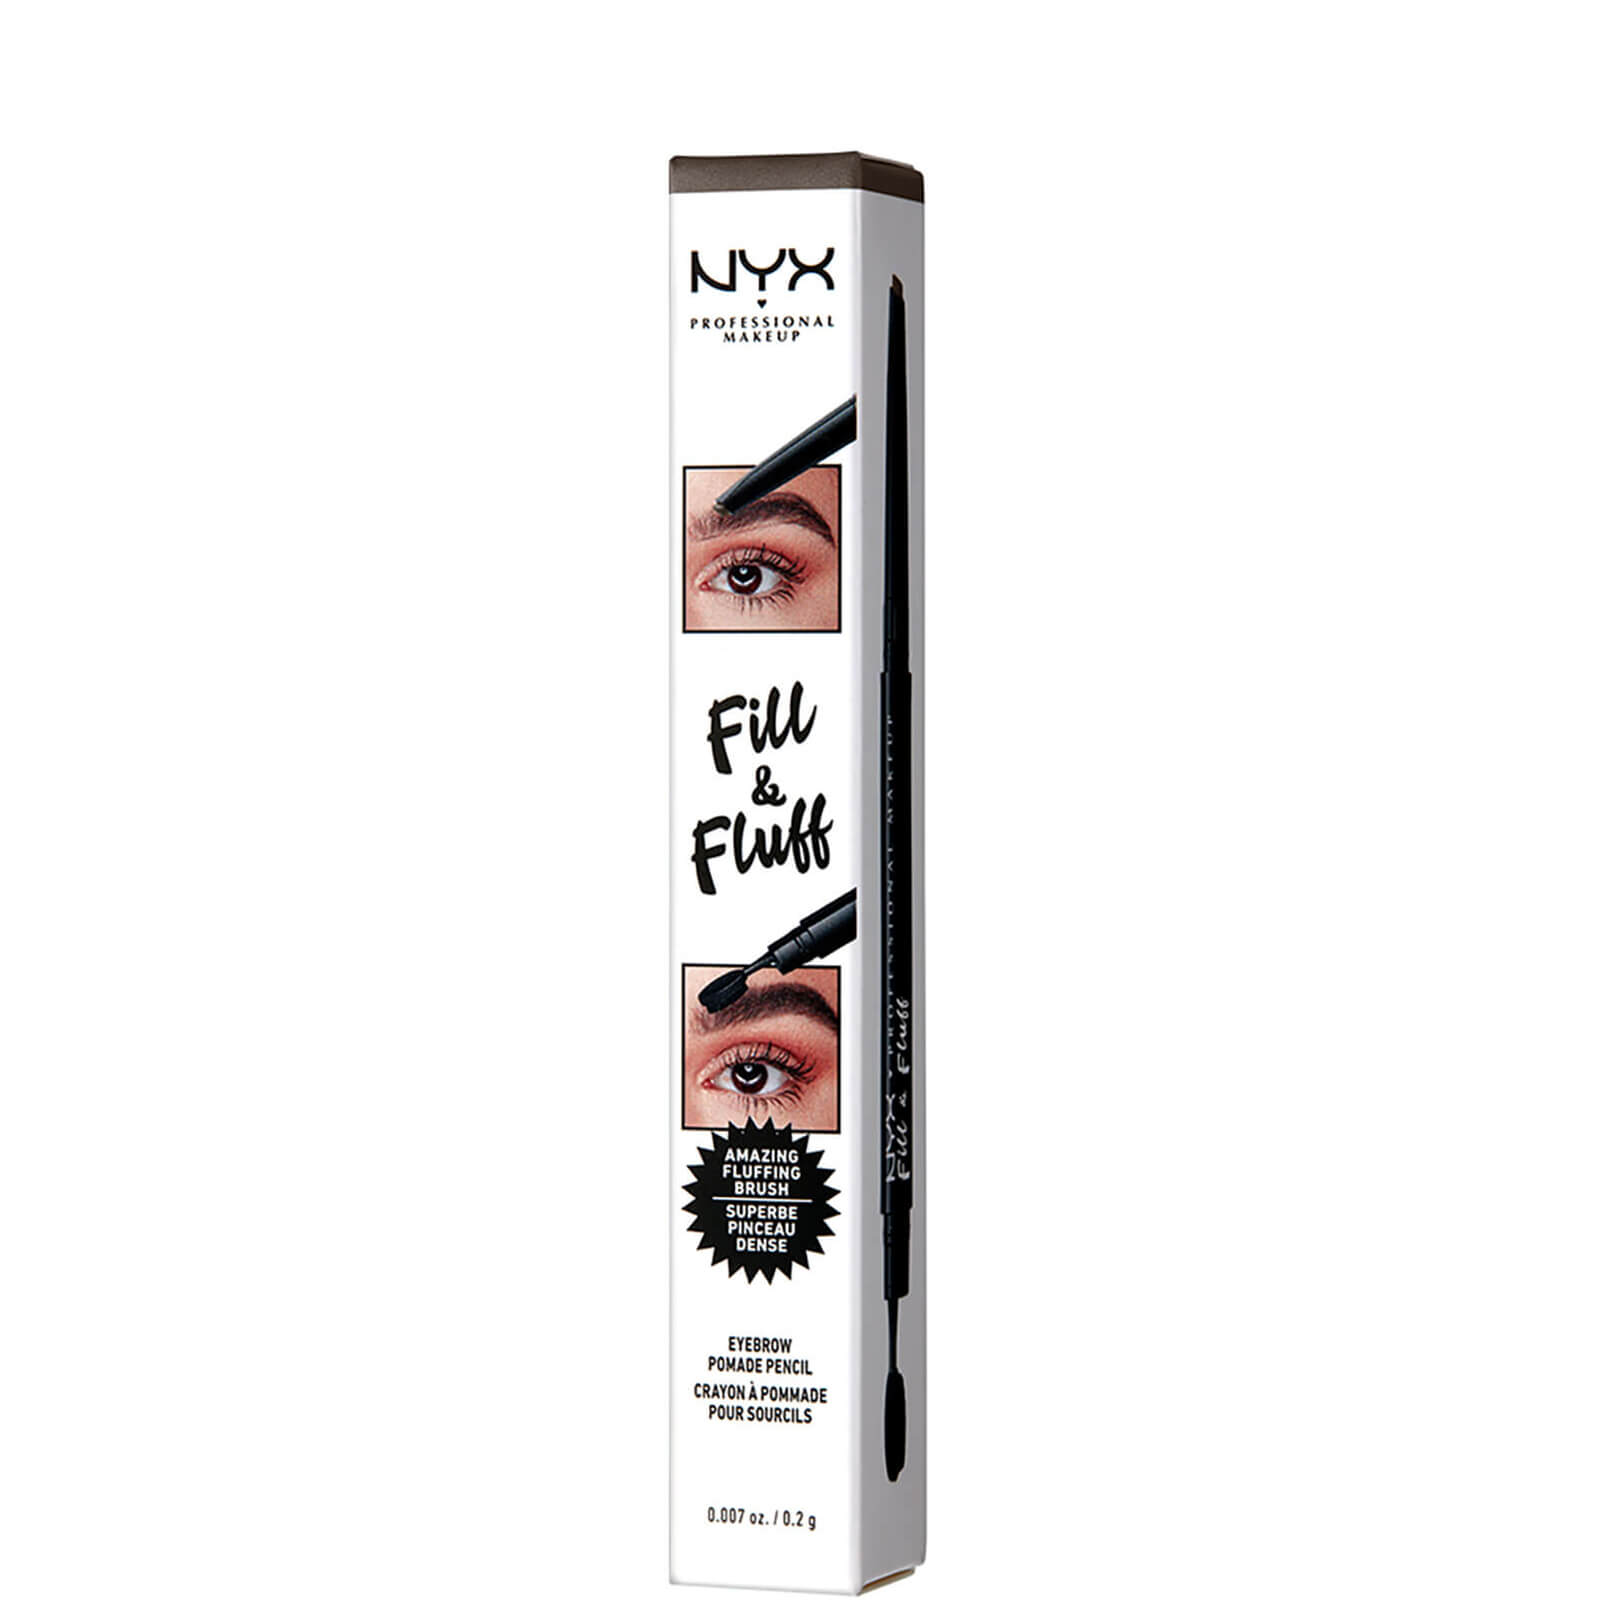 NYX Professional Makeup Fill and Fluff Eyebrow Pomade Pencil 0.2g (Various Shades) - Brunette